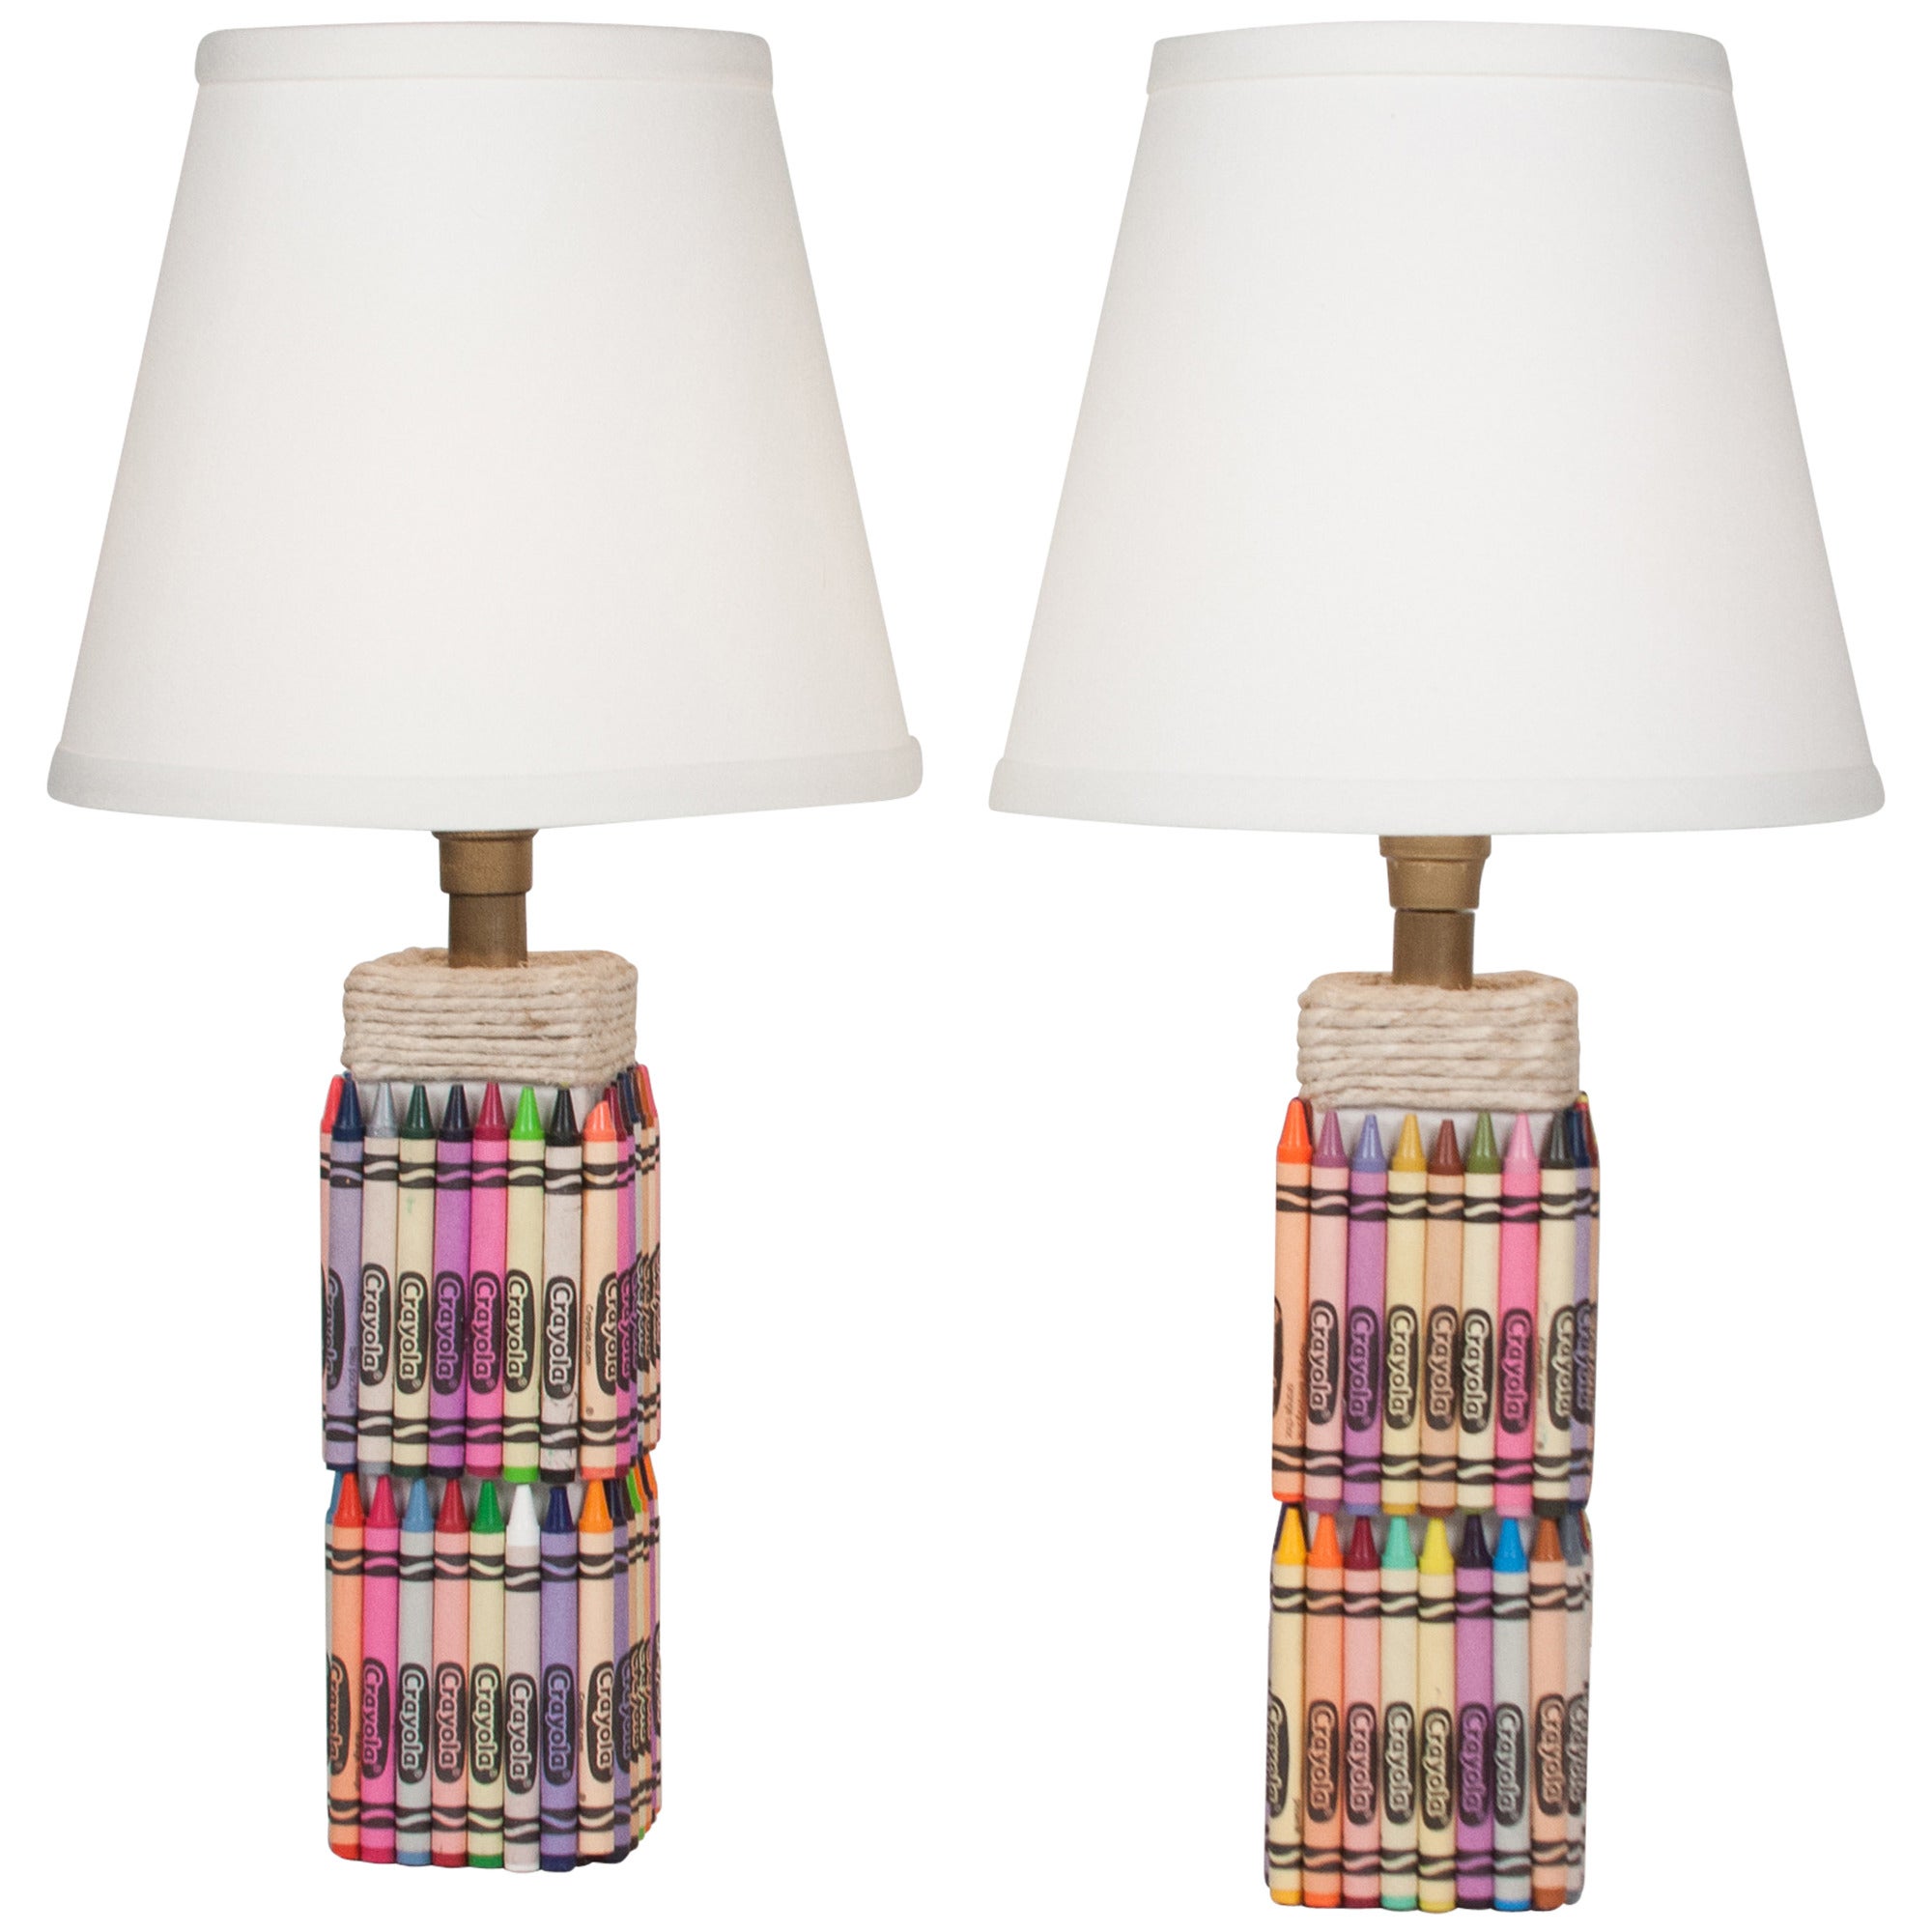 Pair of "Crayola" Table Lamps,